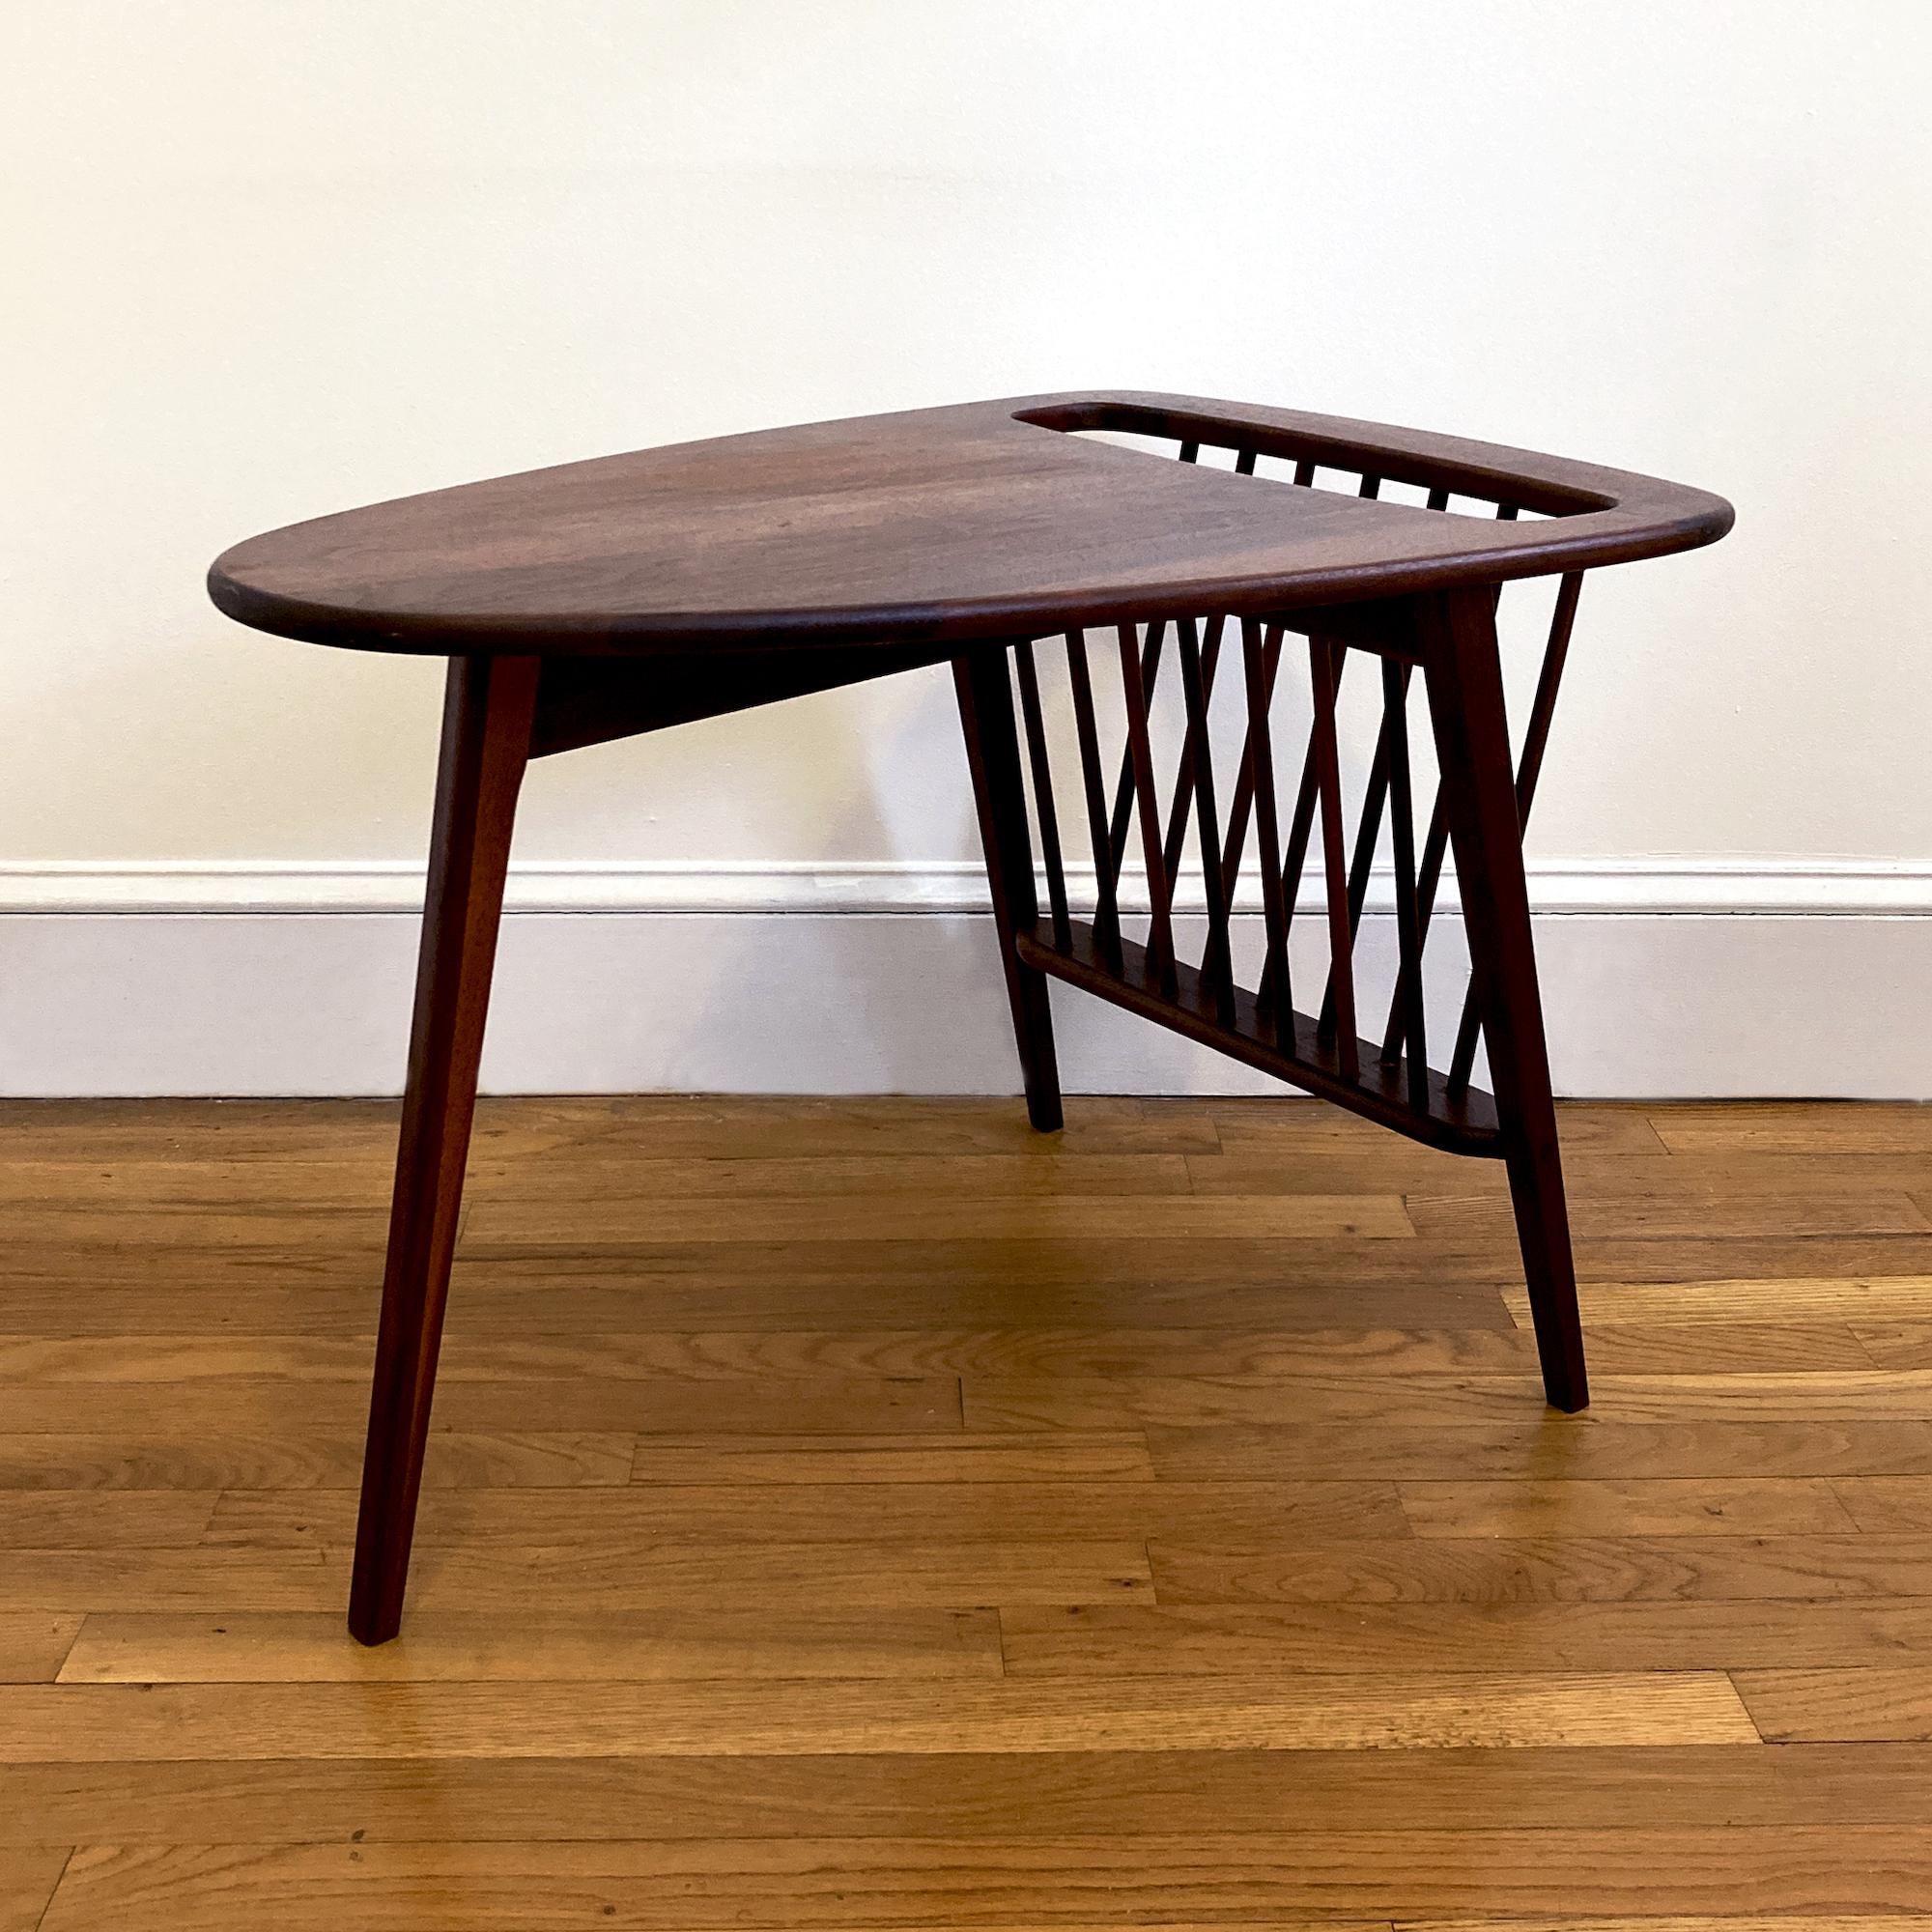 Mid-Century Modern solid walnut side table with magazine rack designed by Arthur Umanoff (1923-1985) for Washington Woodcraft in 1964. 

Dimensions: H 20.75